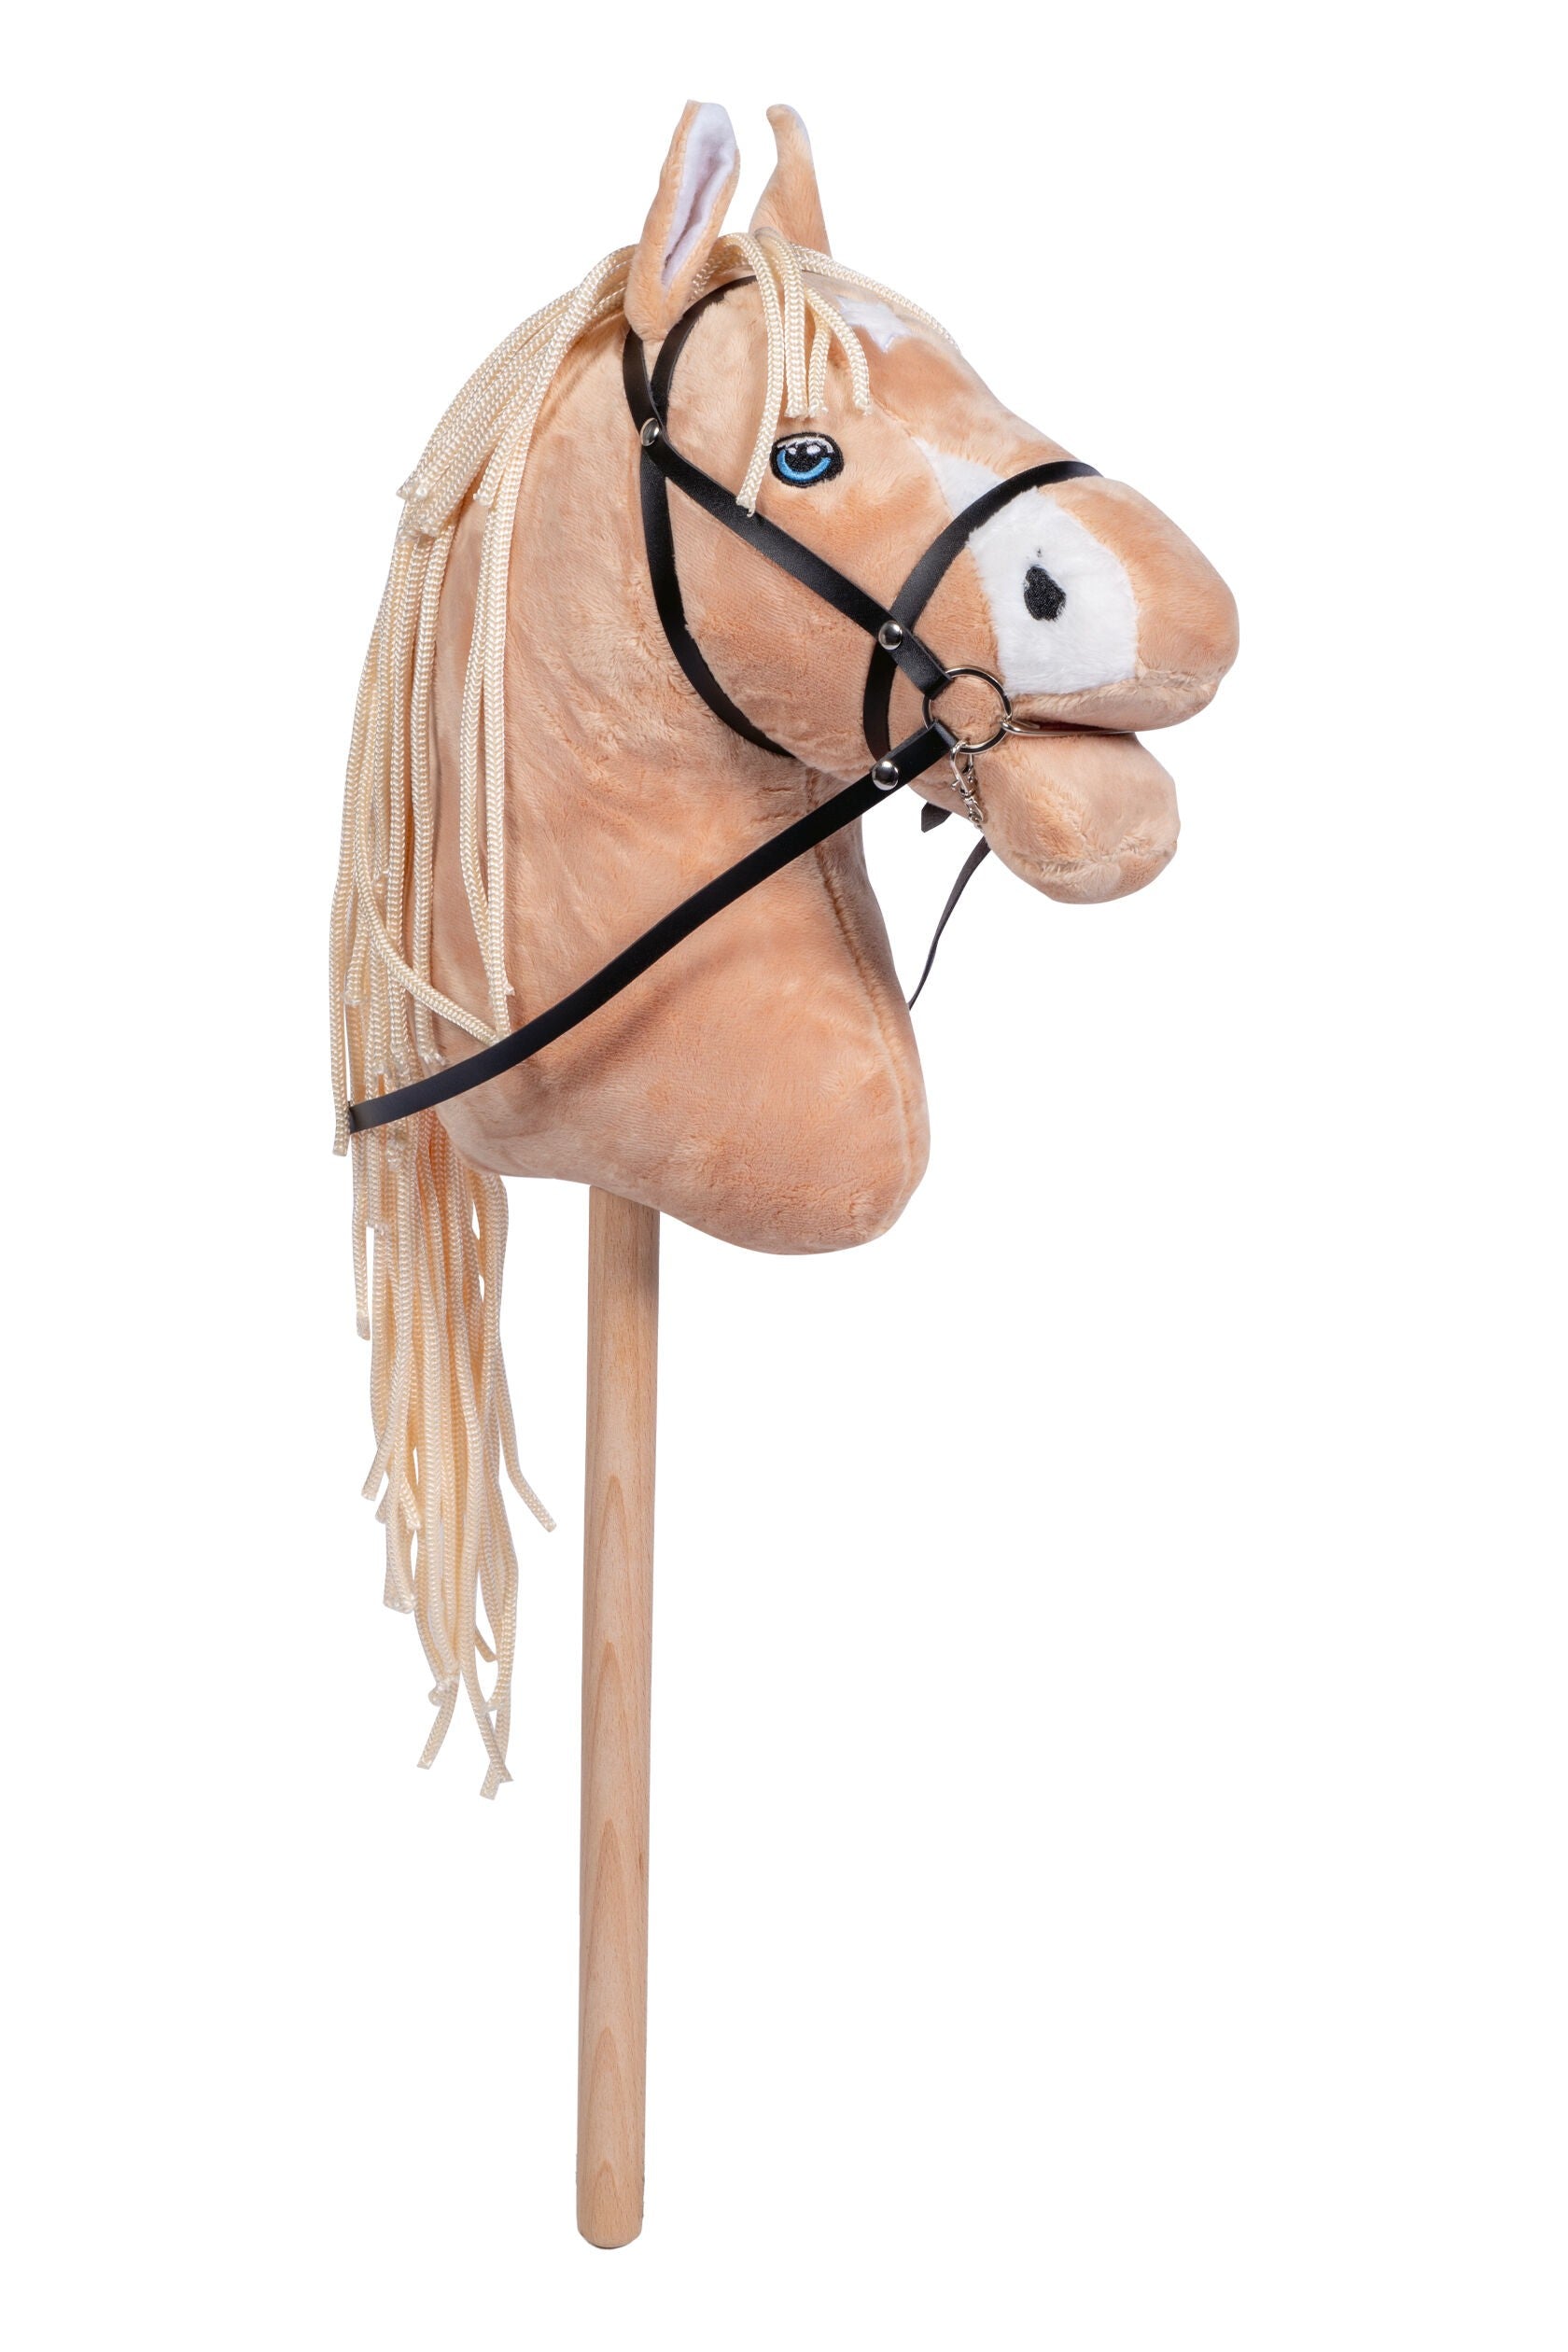 Where to Buy Hobby Horses and Hobby Horse Supplies? – Wonder Equestrian